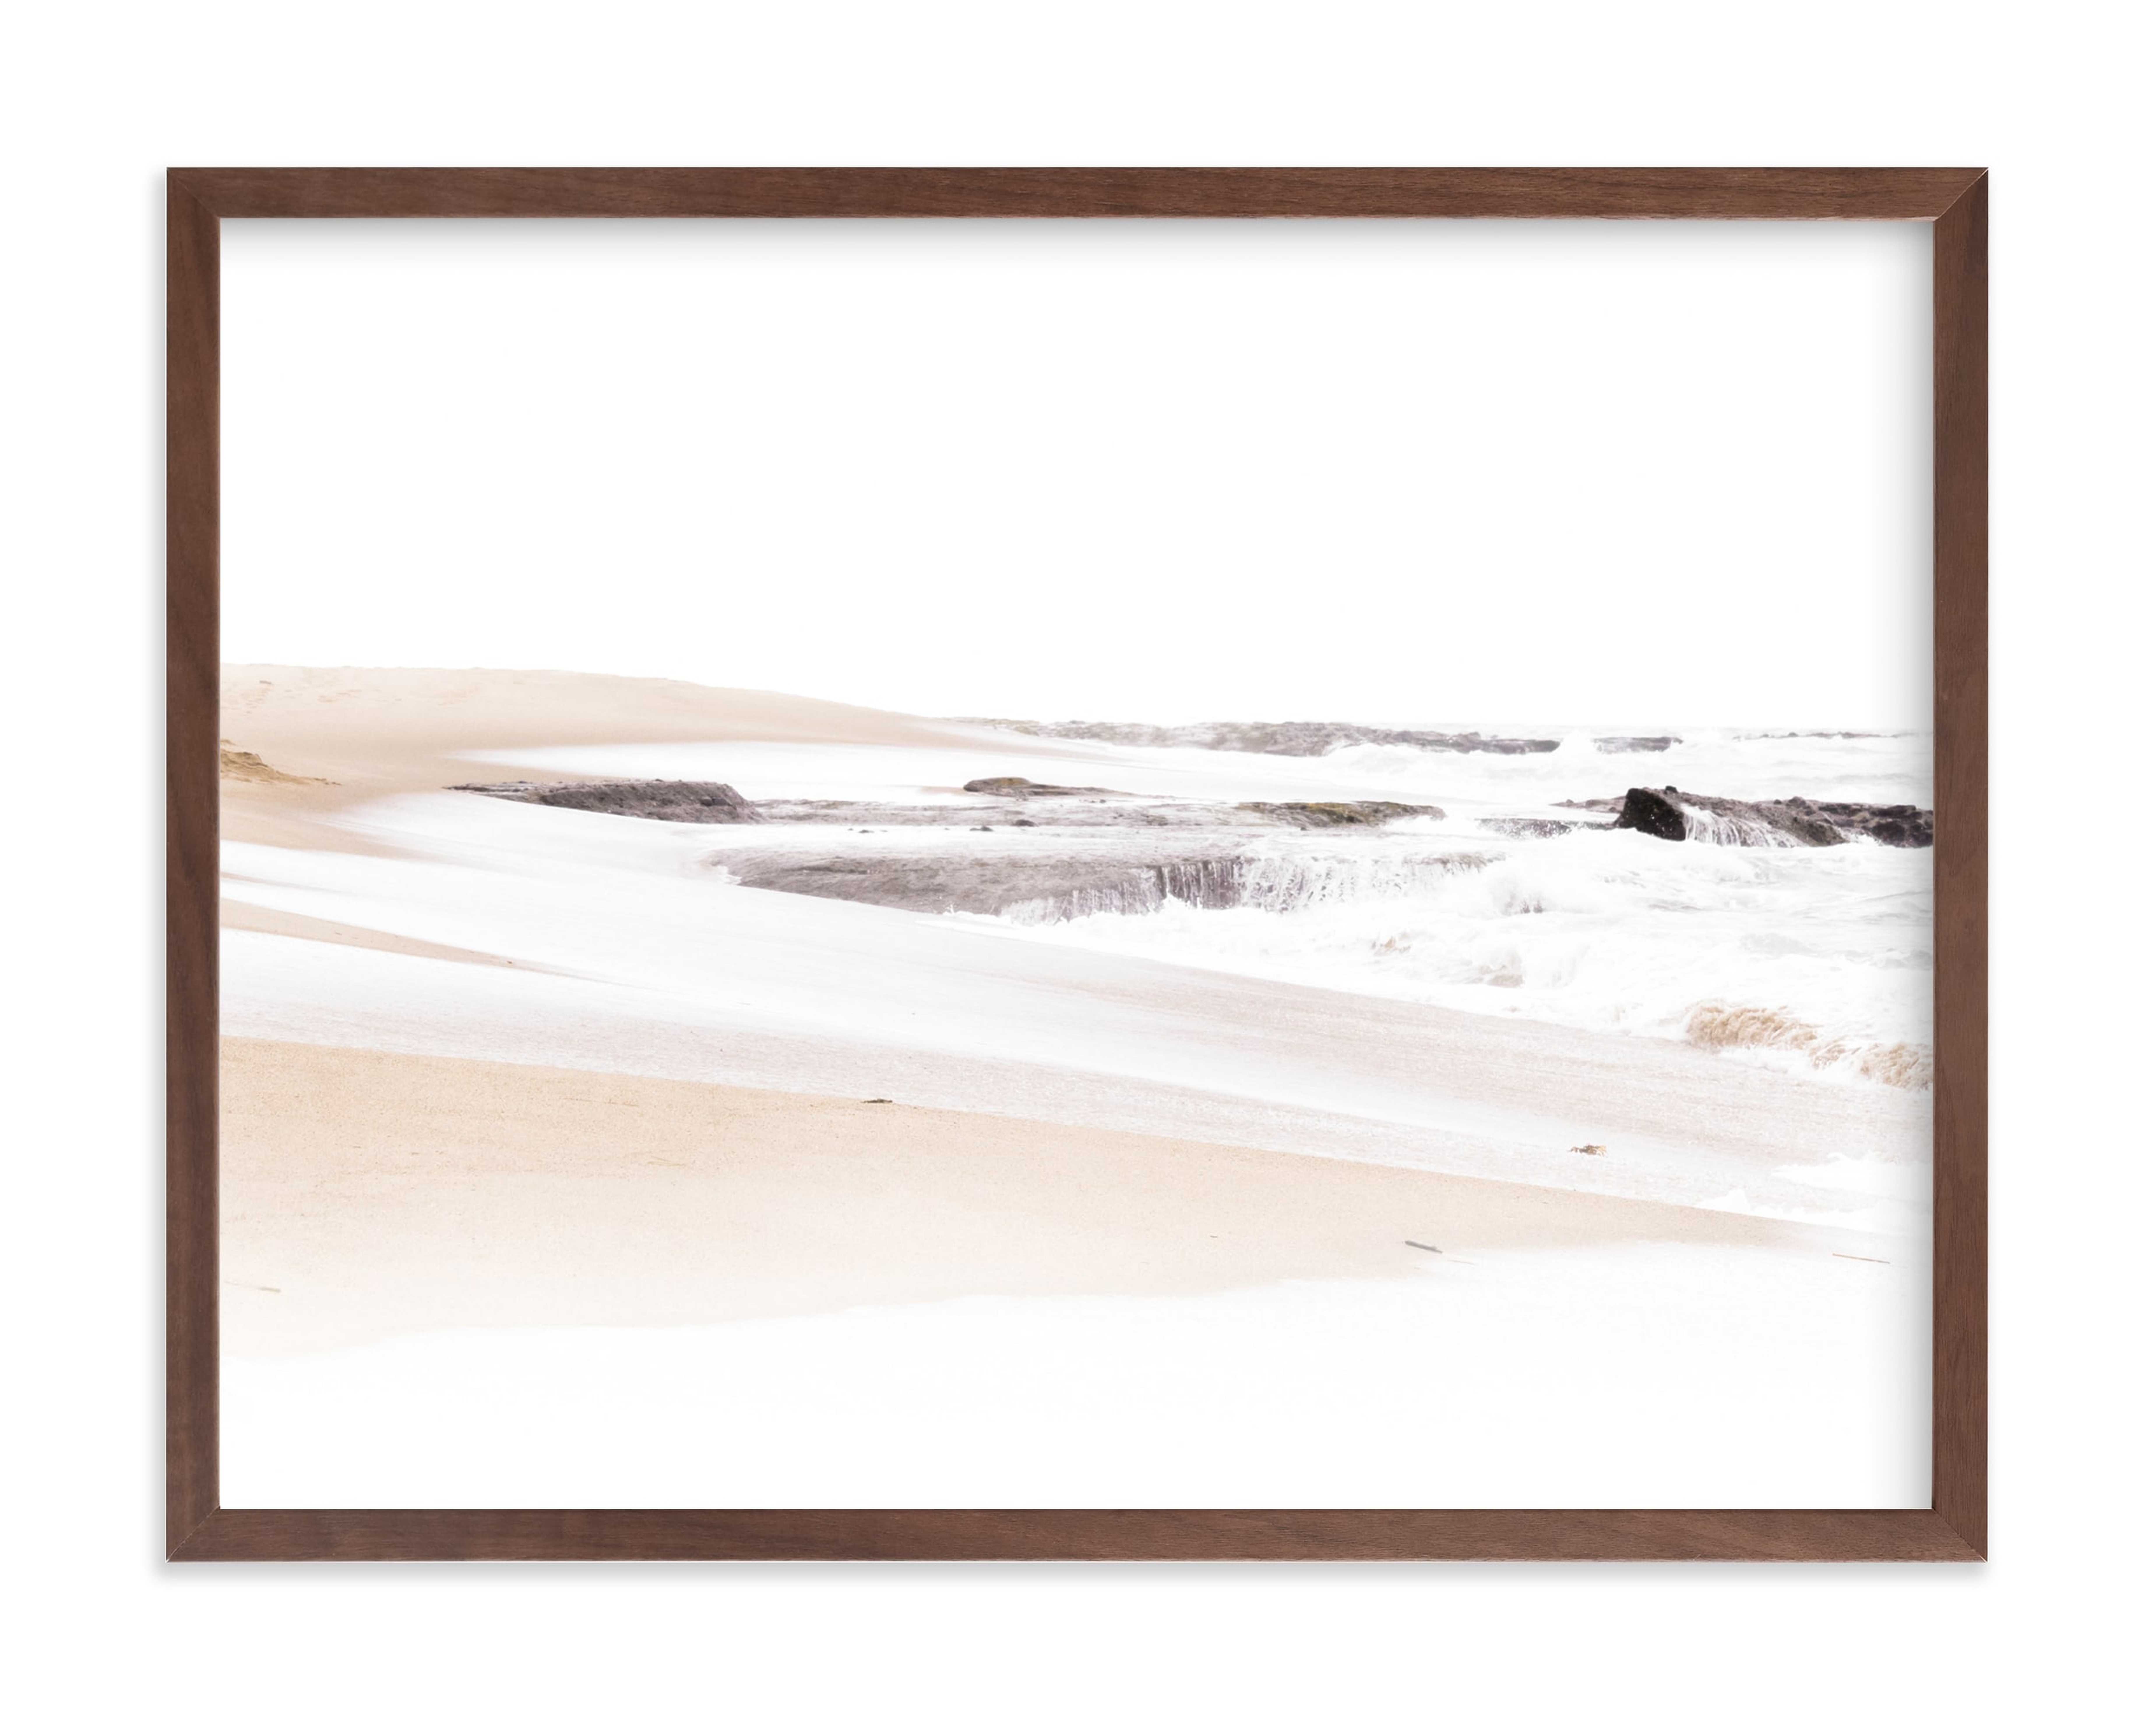 Room To Breathe Limited Edition Fine Art Print - Minted